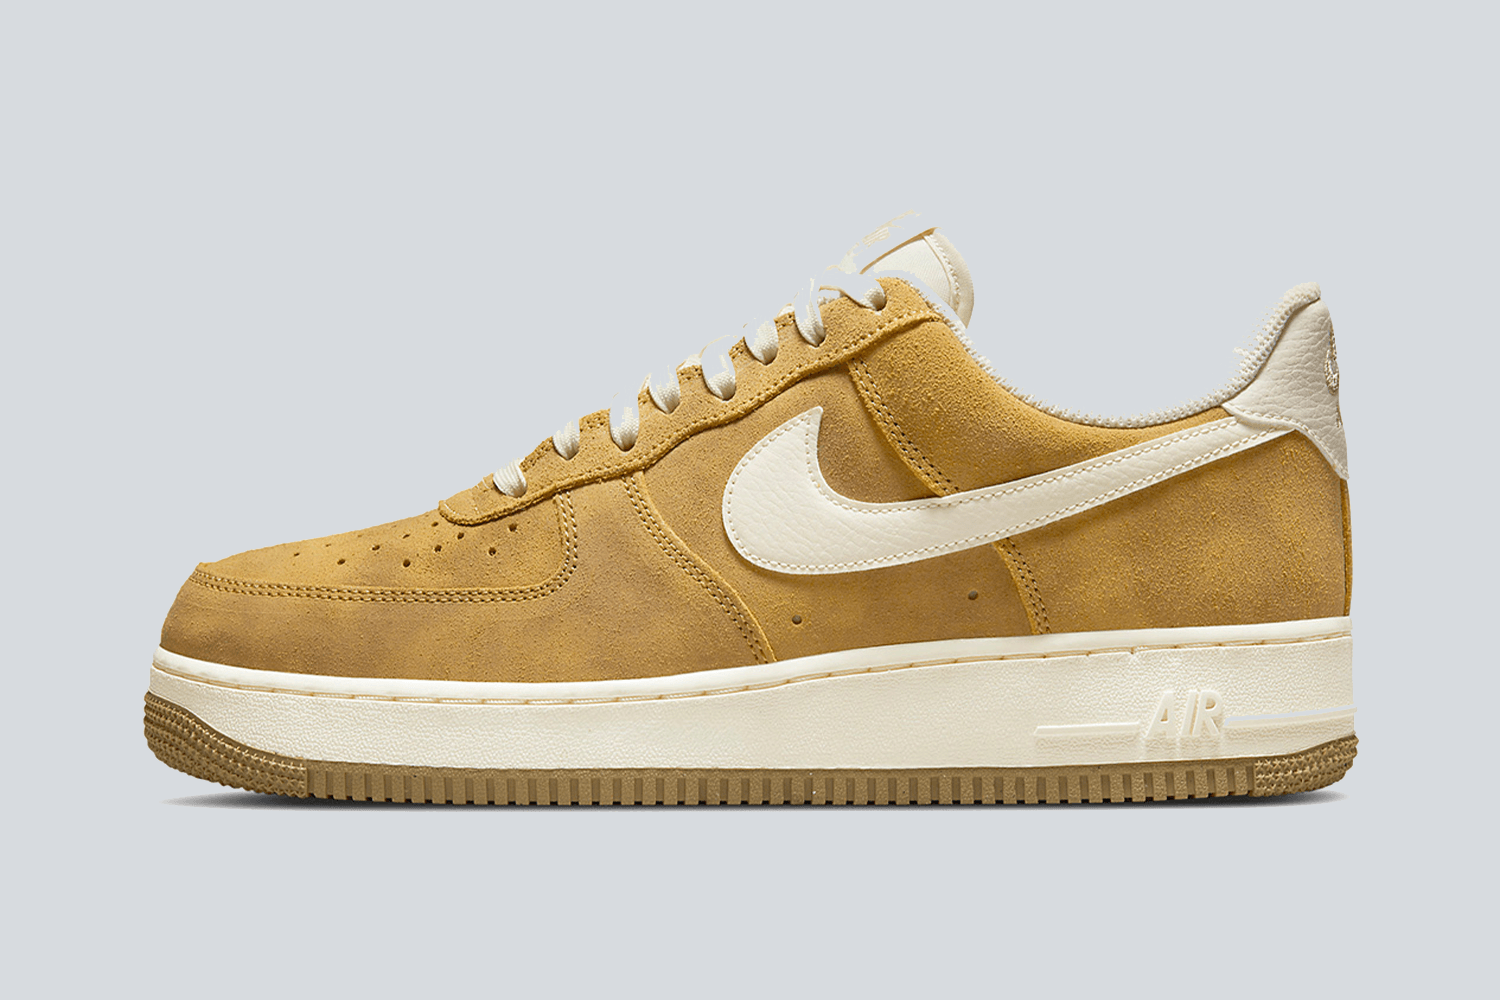 Der Nike Air Force 1 Low in 'Sanded Gold'